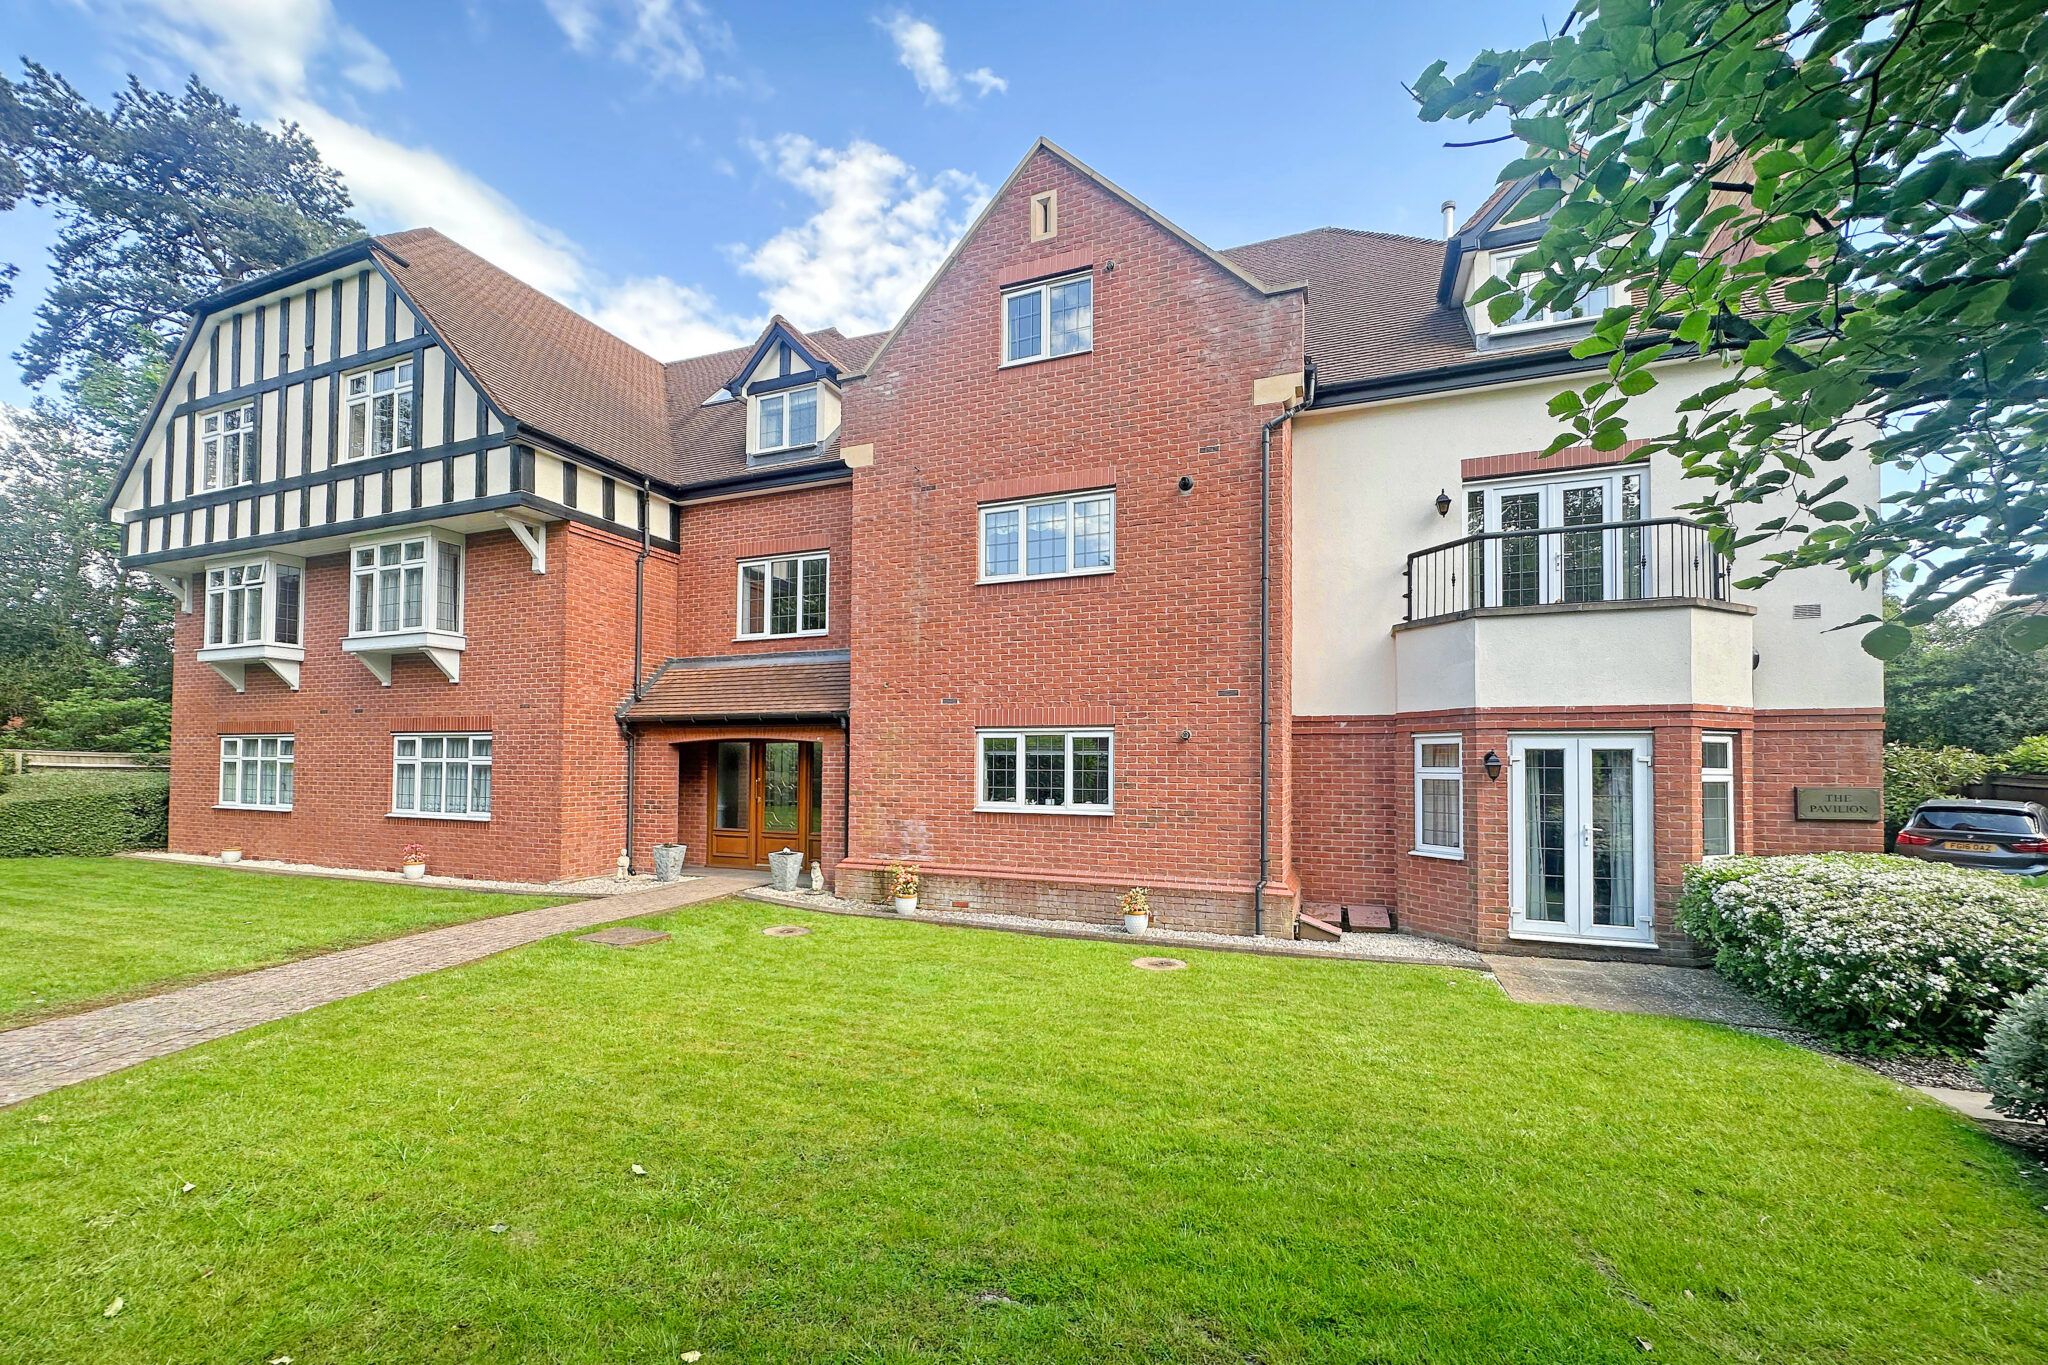 Apartment 4, The Pavilion, Station Road, Knowle, Solihull, B93 0PU